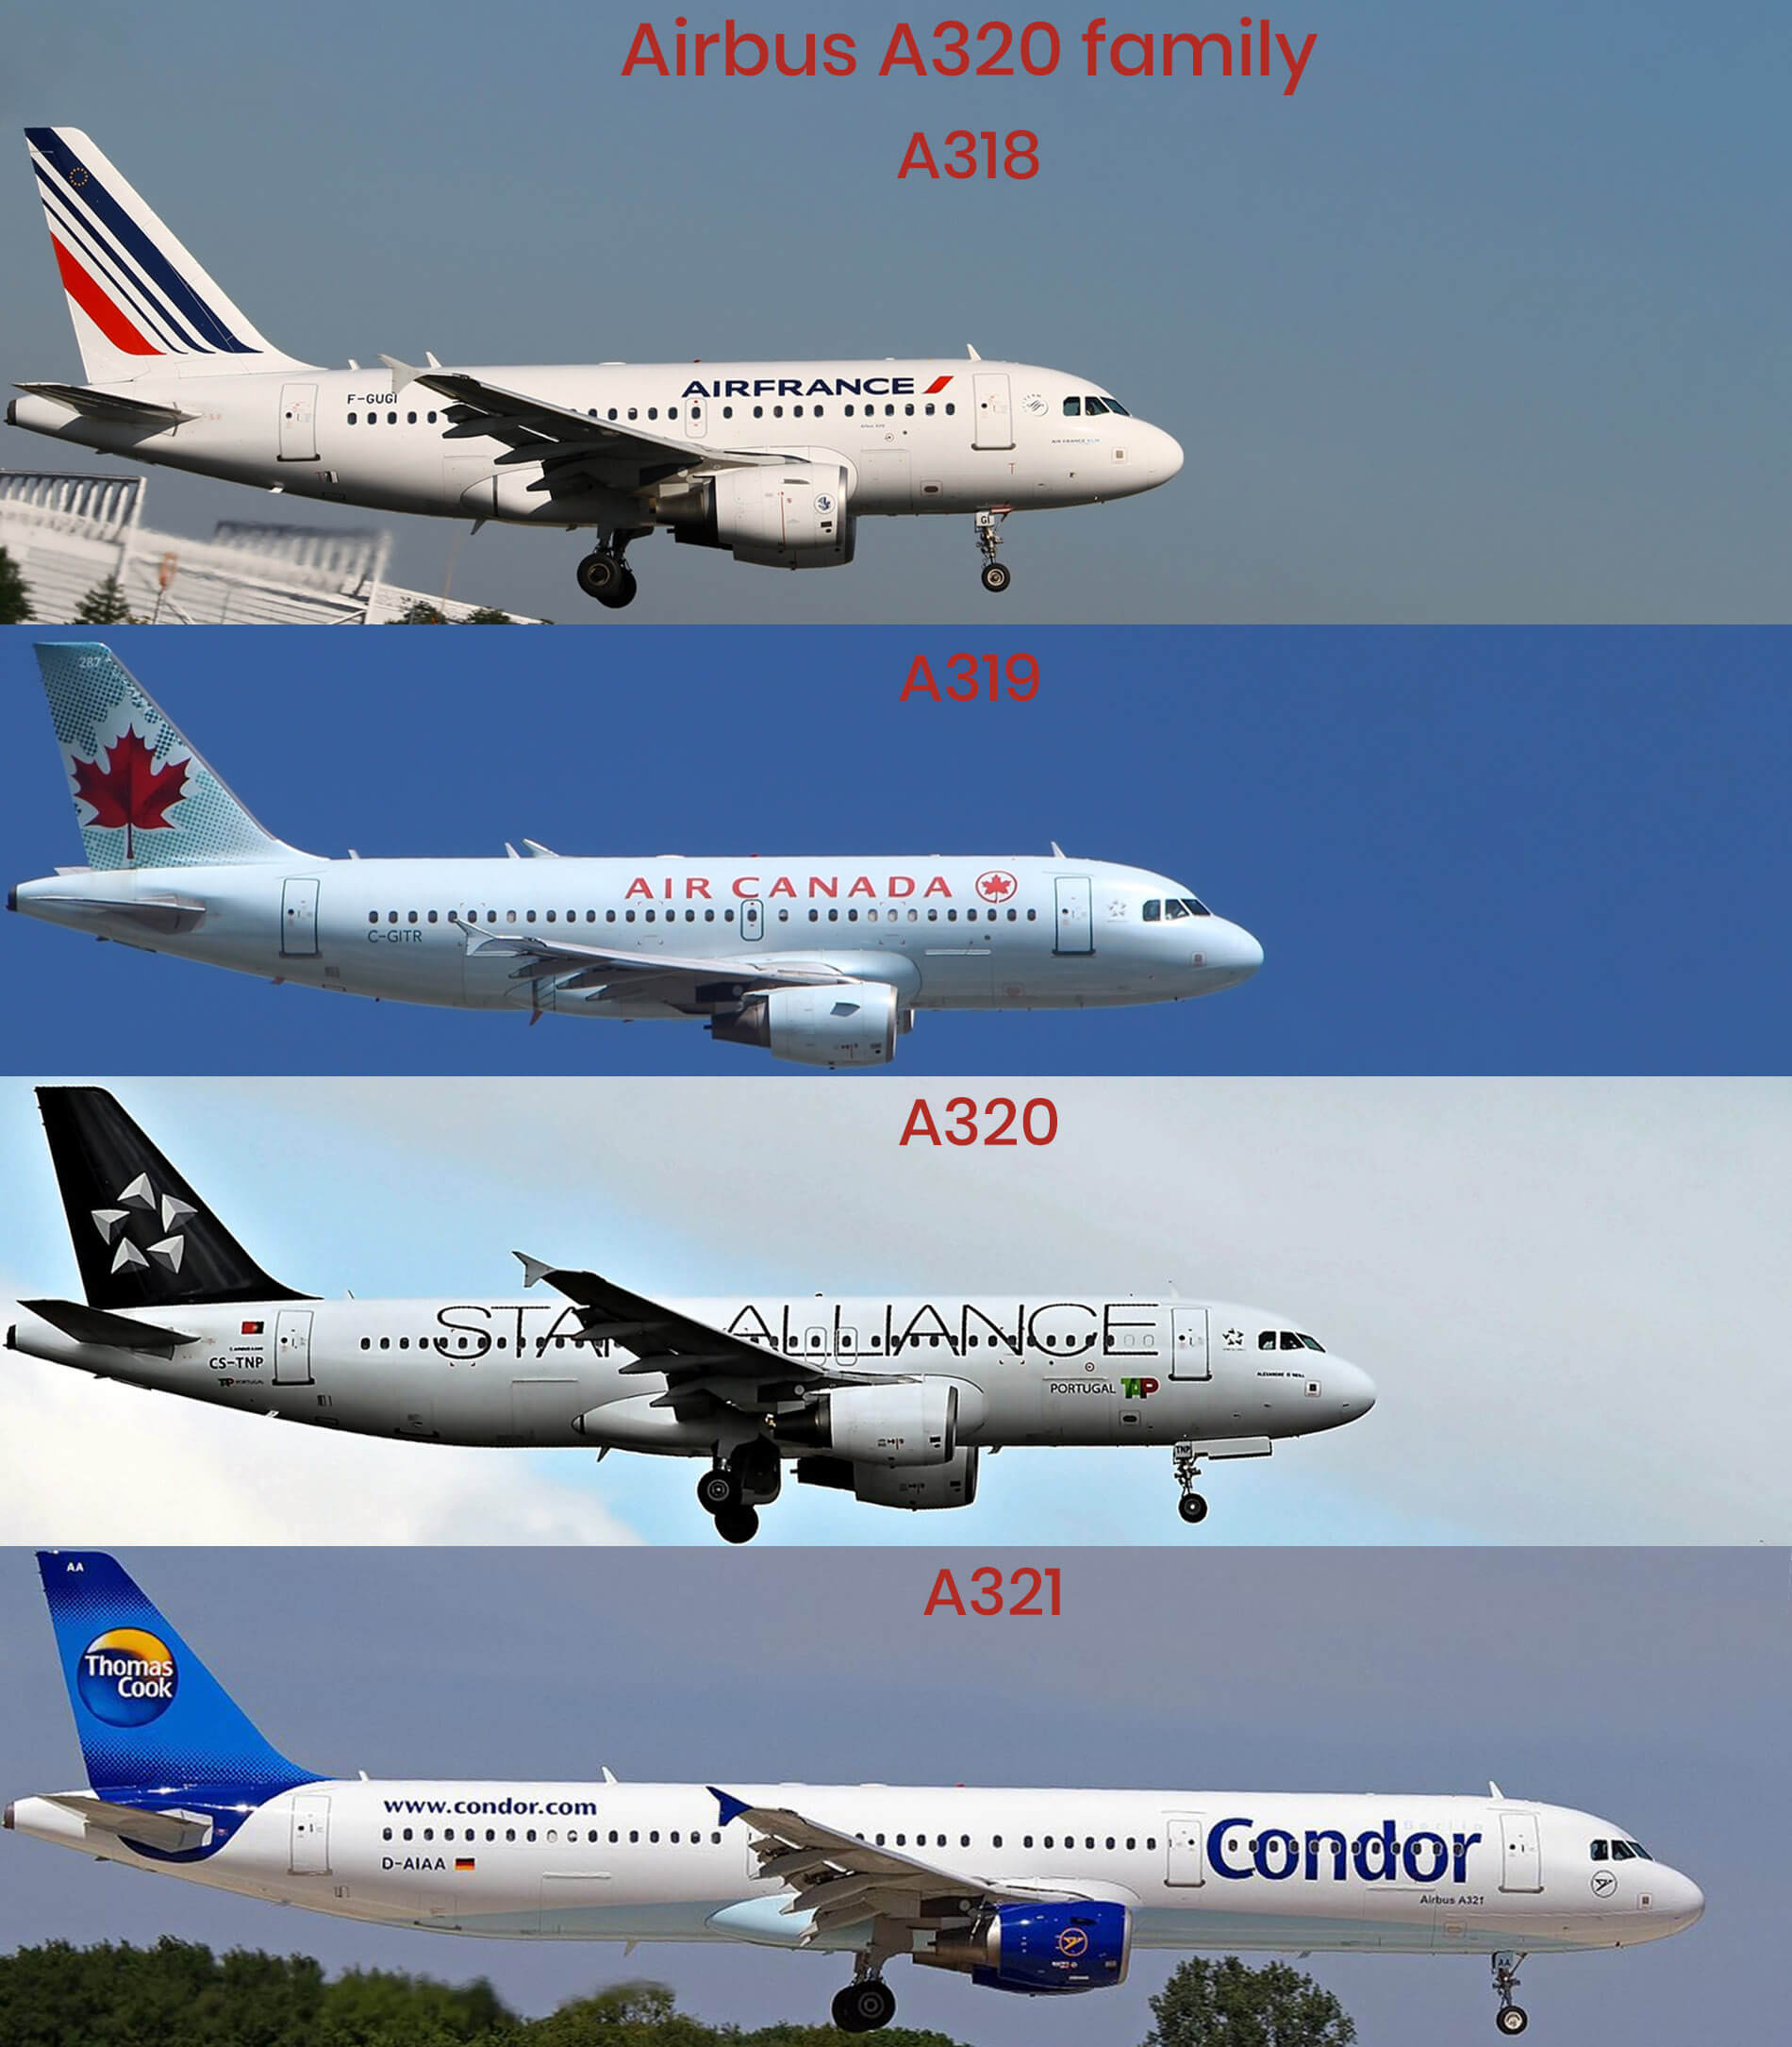 Airbus A320 spotting guide